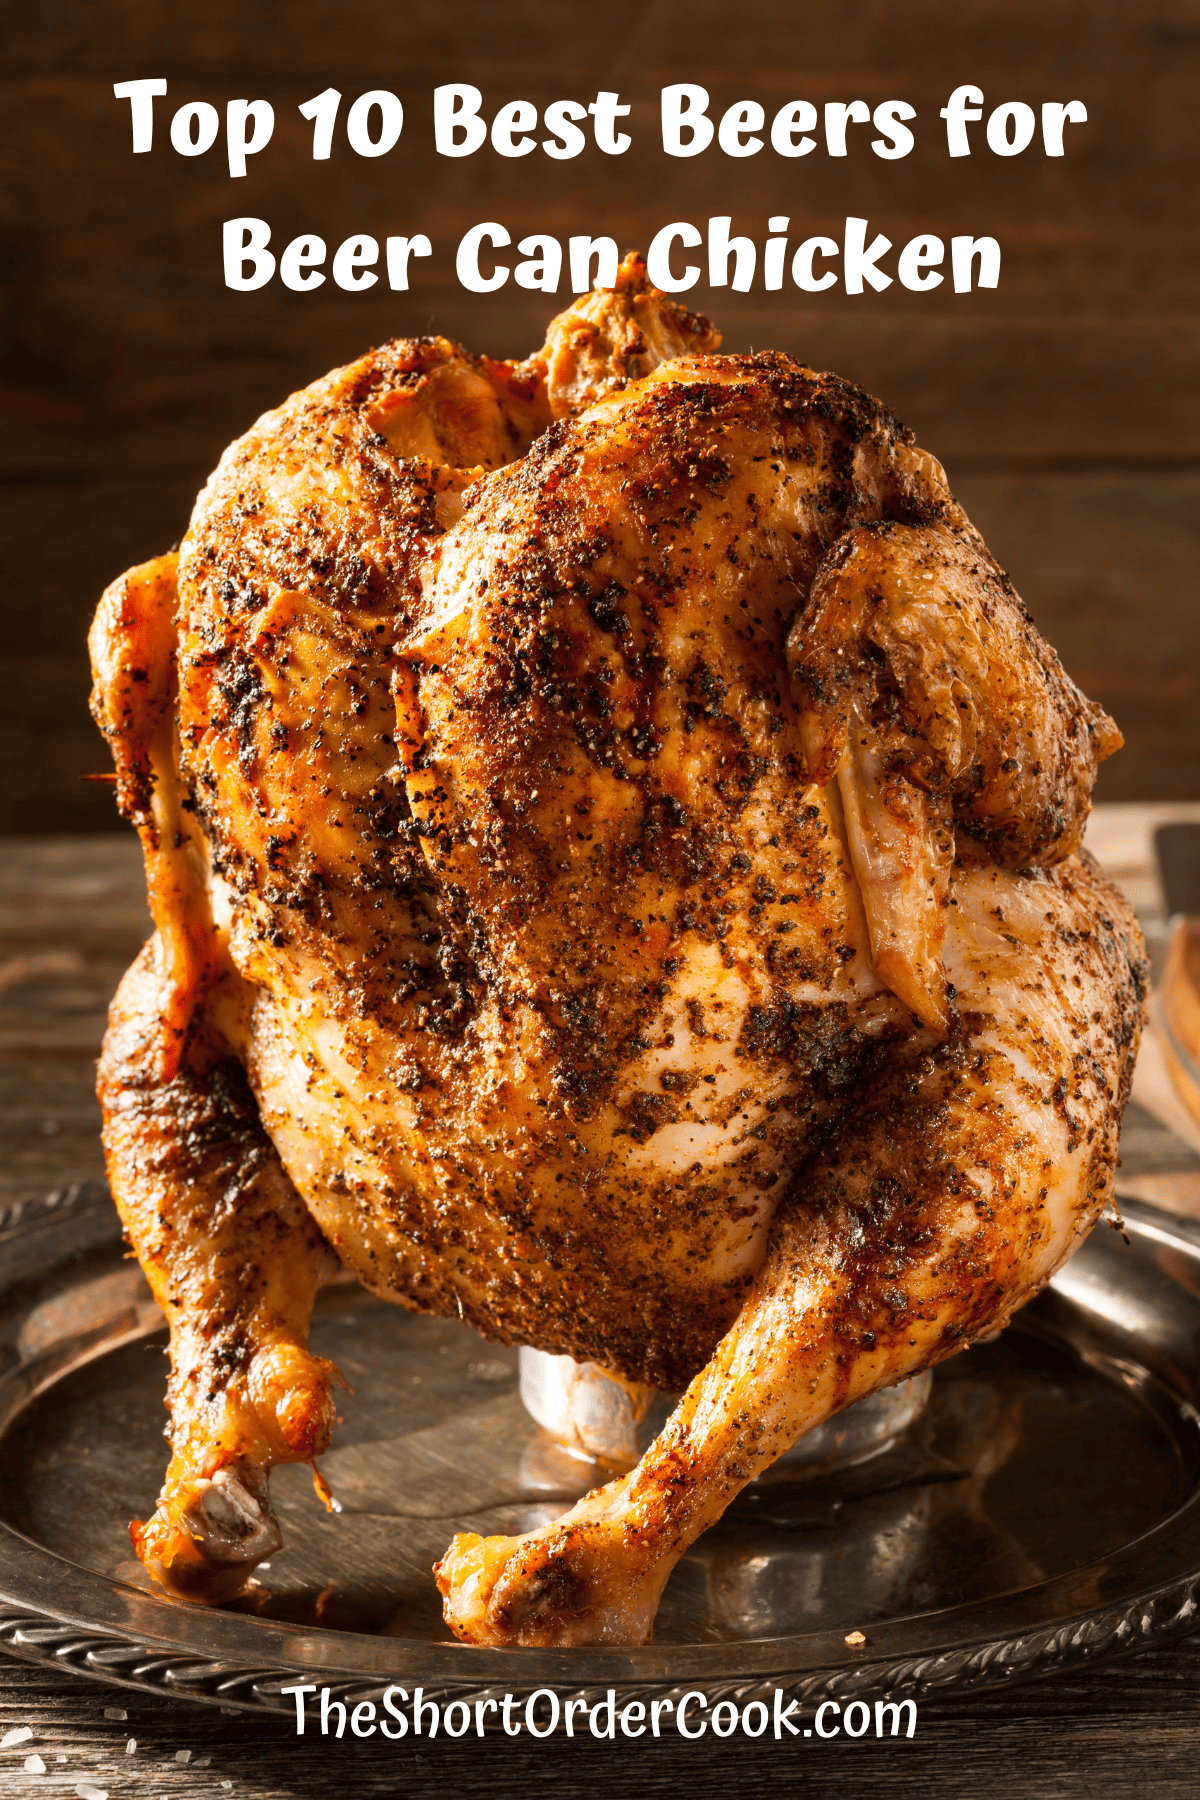 Top 10 Best Beers for Beer Can Chicken including list of pilsners, lagers, & wheat kinds.